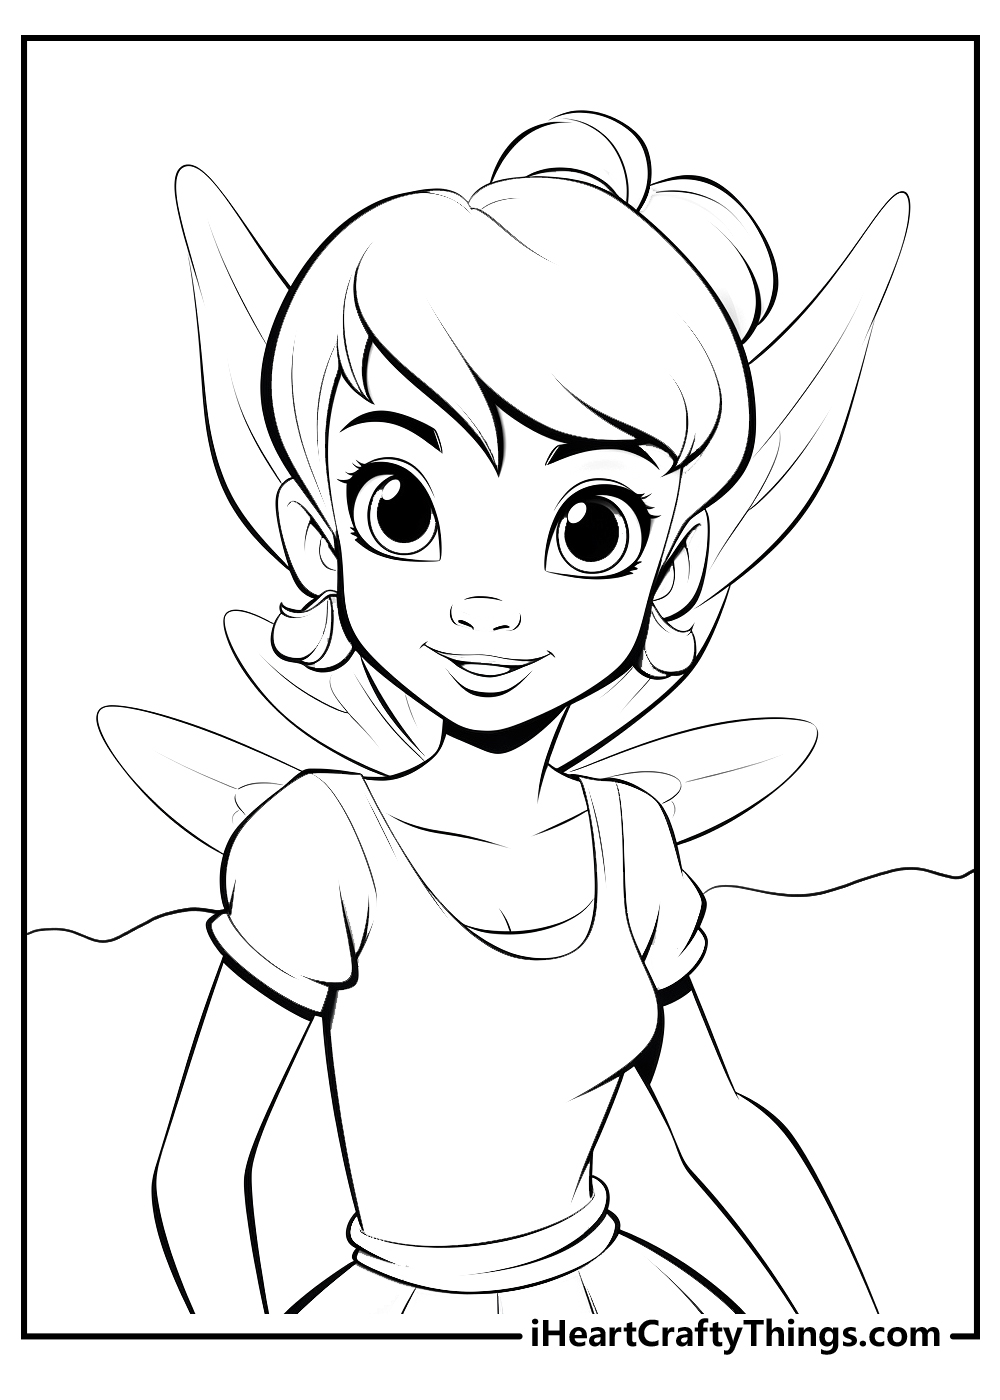 tinkerbell coloring pages for kids free download